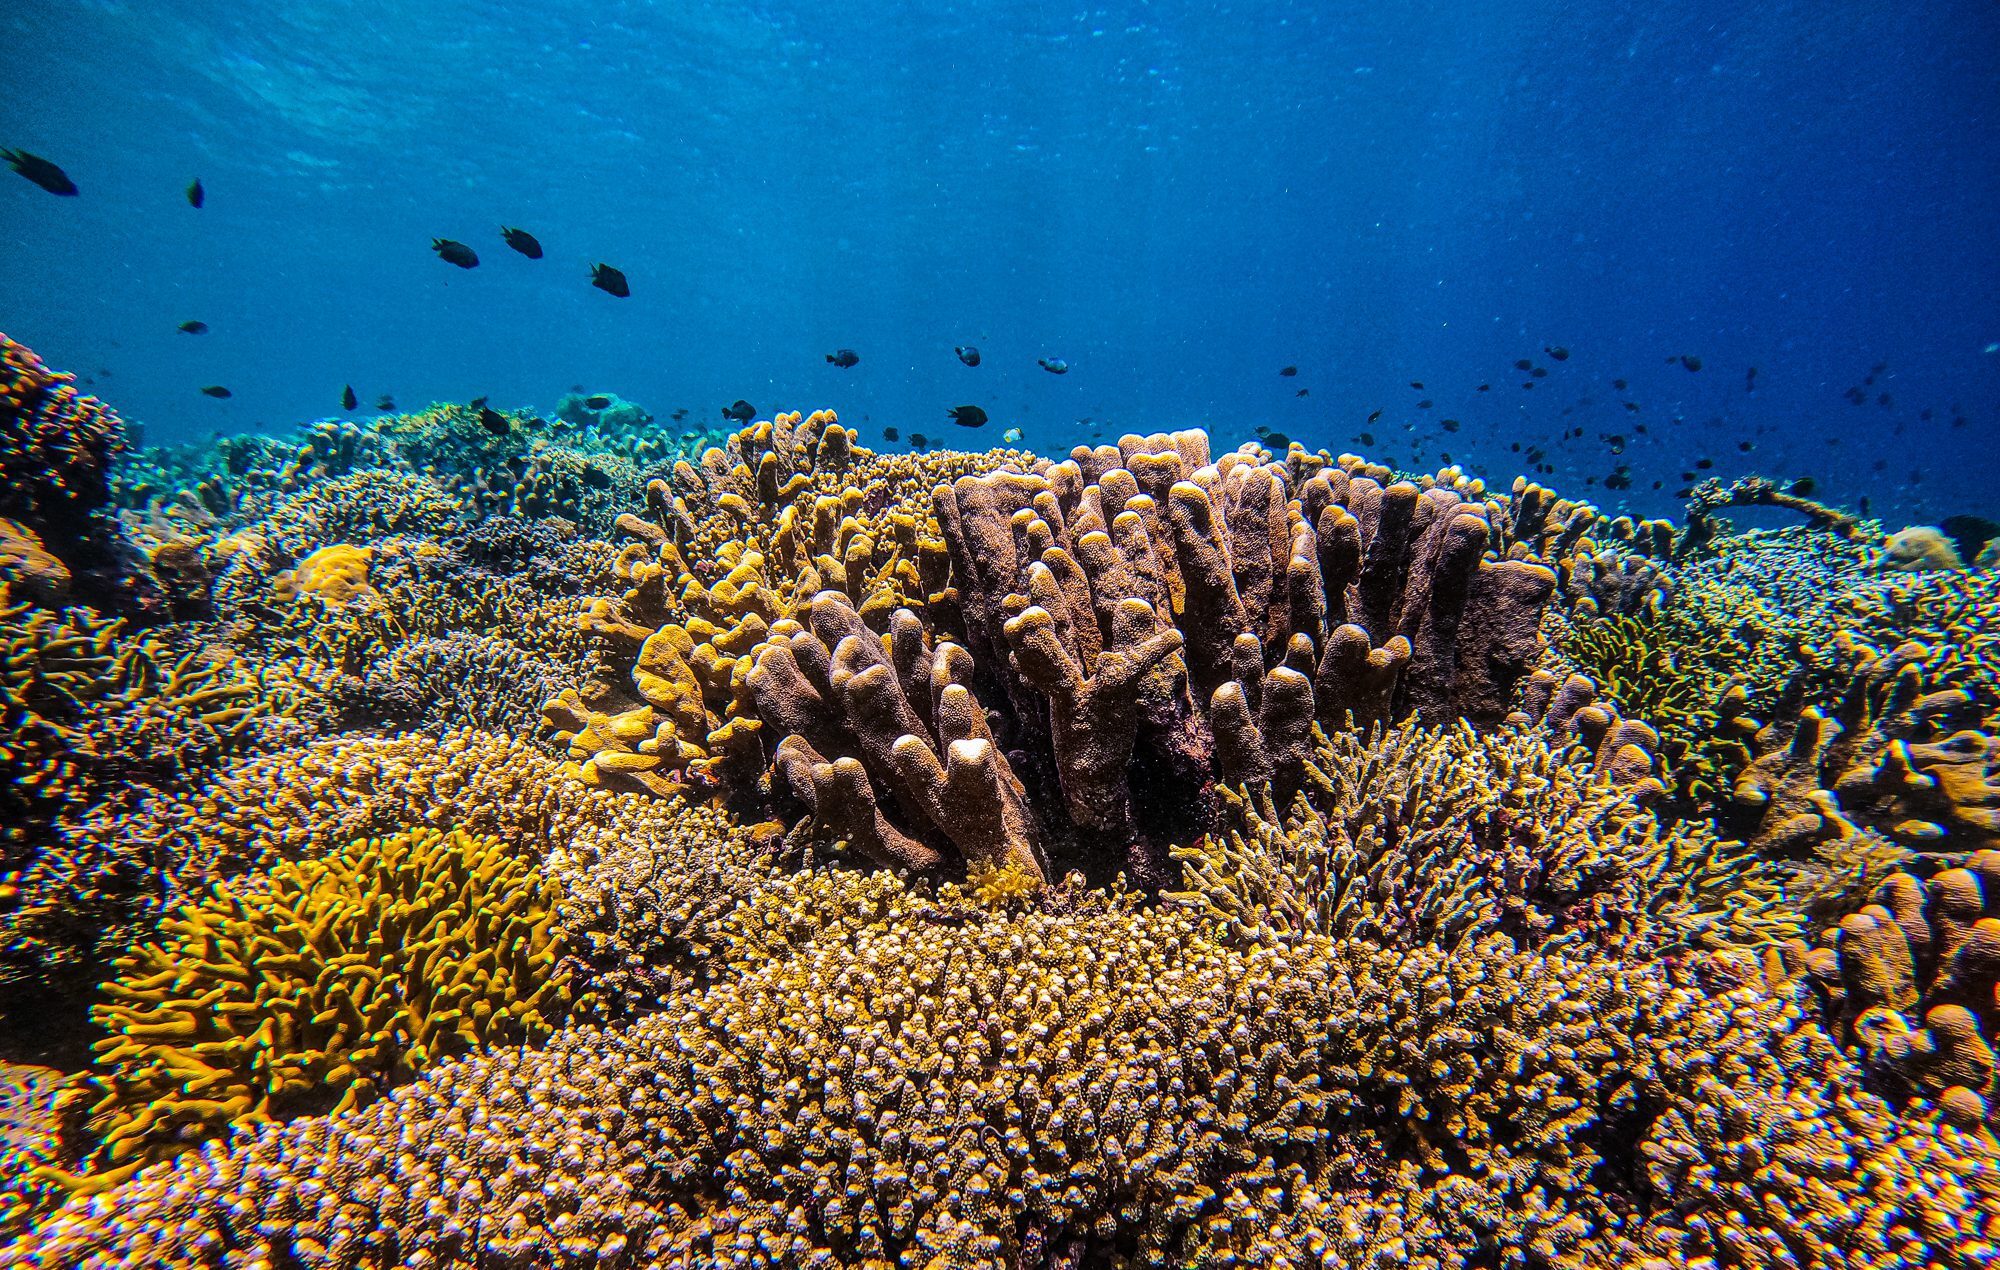 Coral Reefs and school of fish at Bunaken